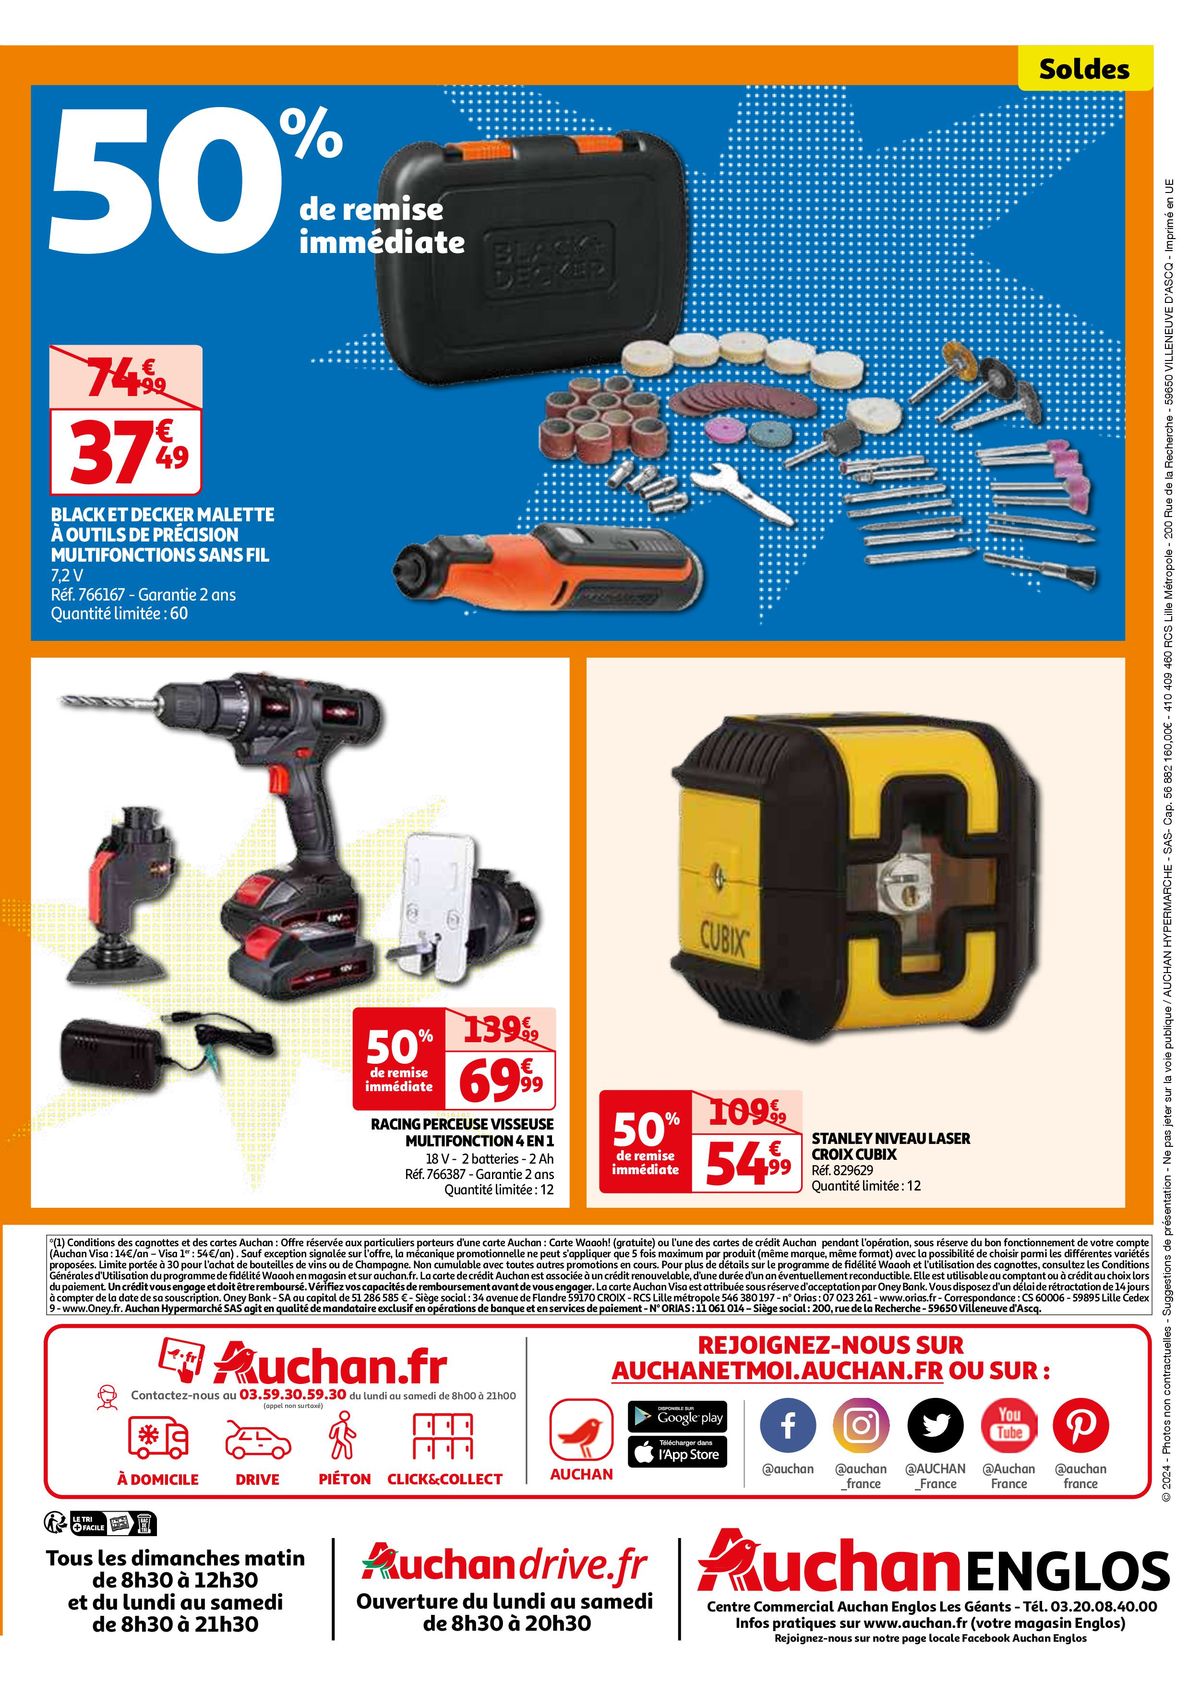 Catalogue SOLDES AUCHAN ENGLOS, page 00006